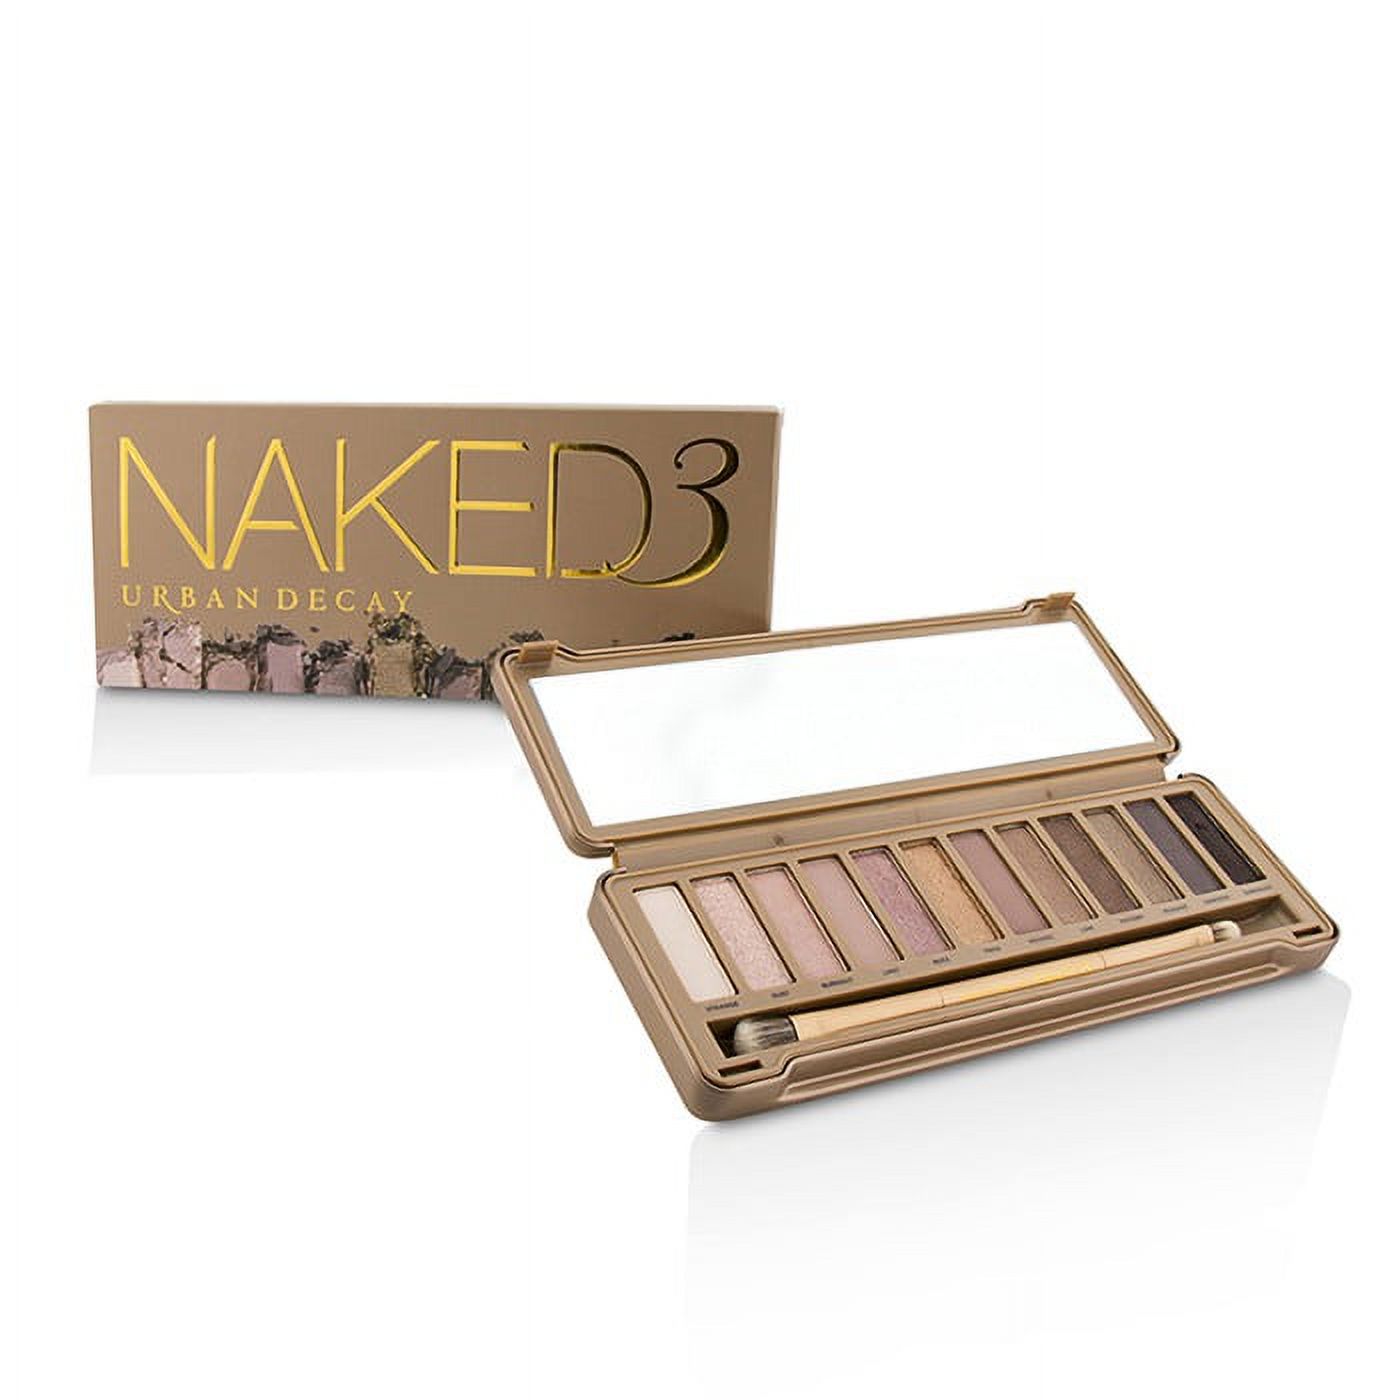 Urban Decay Naked 3 Eyeshadow Palette - image 1 of 2